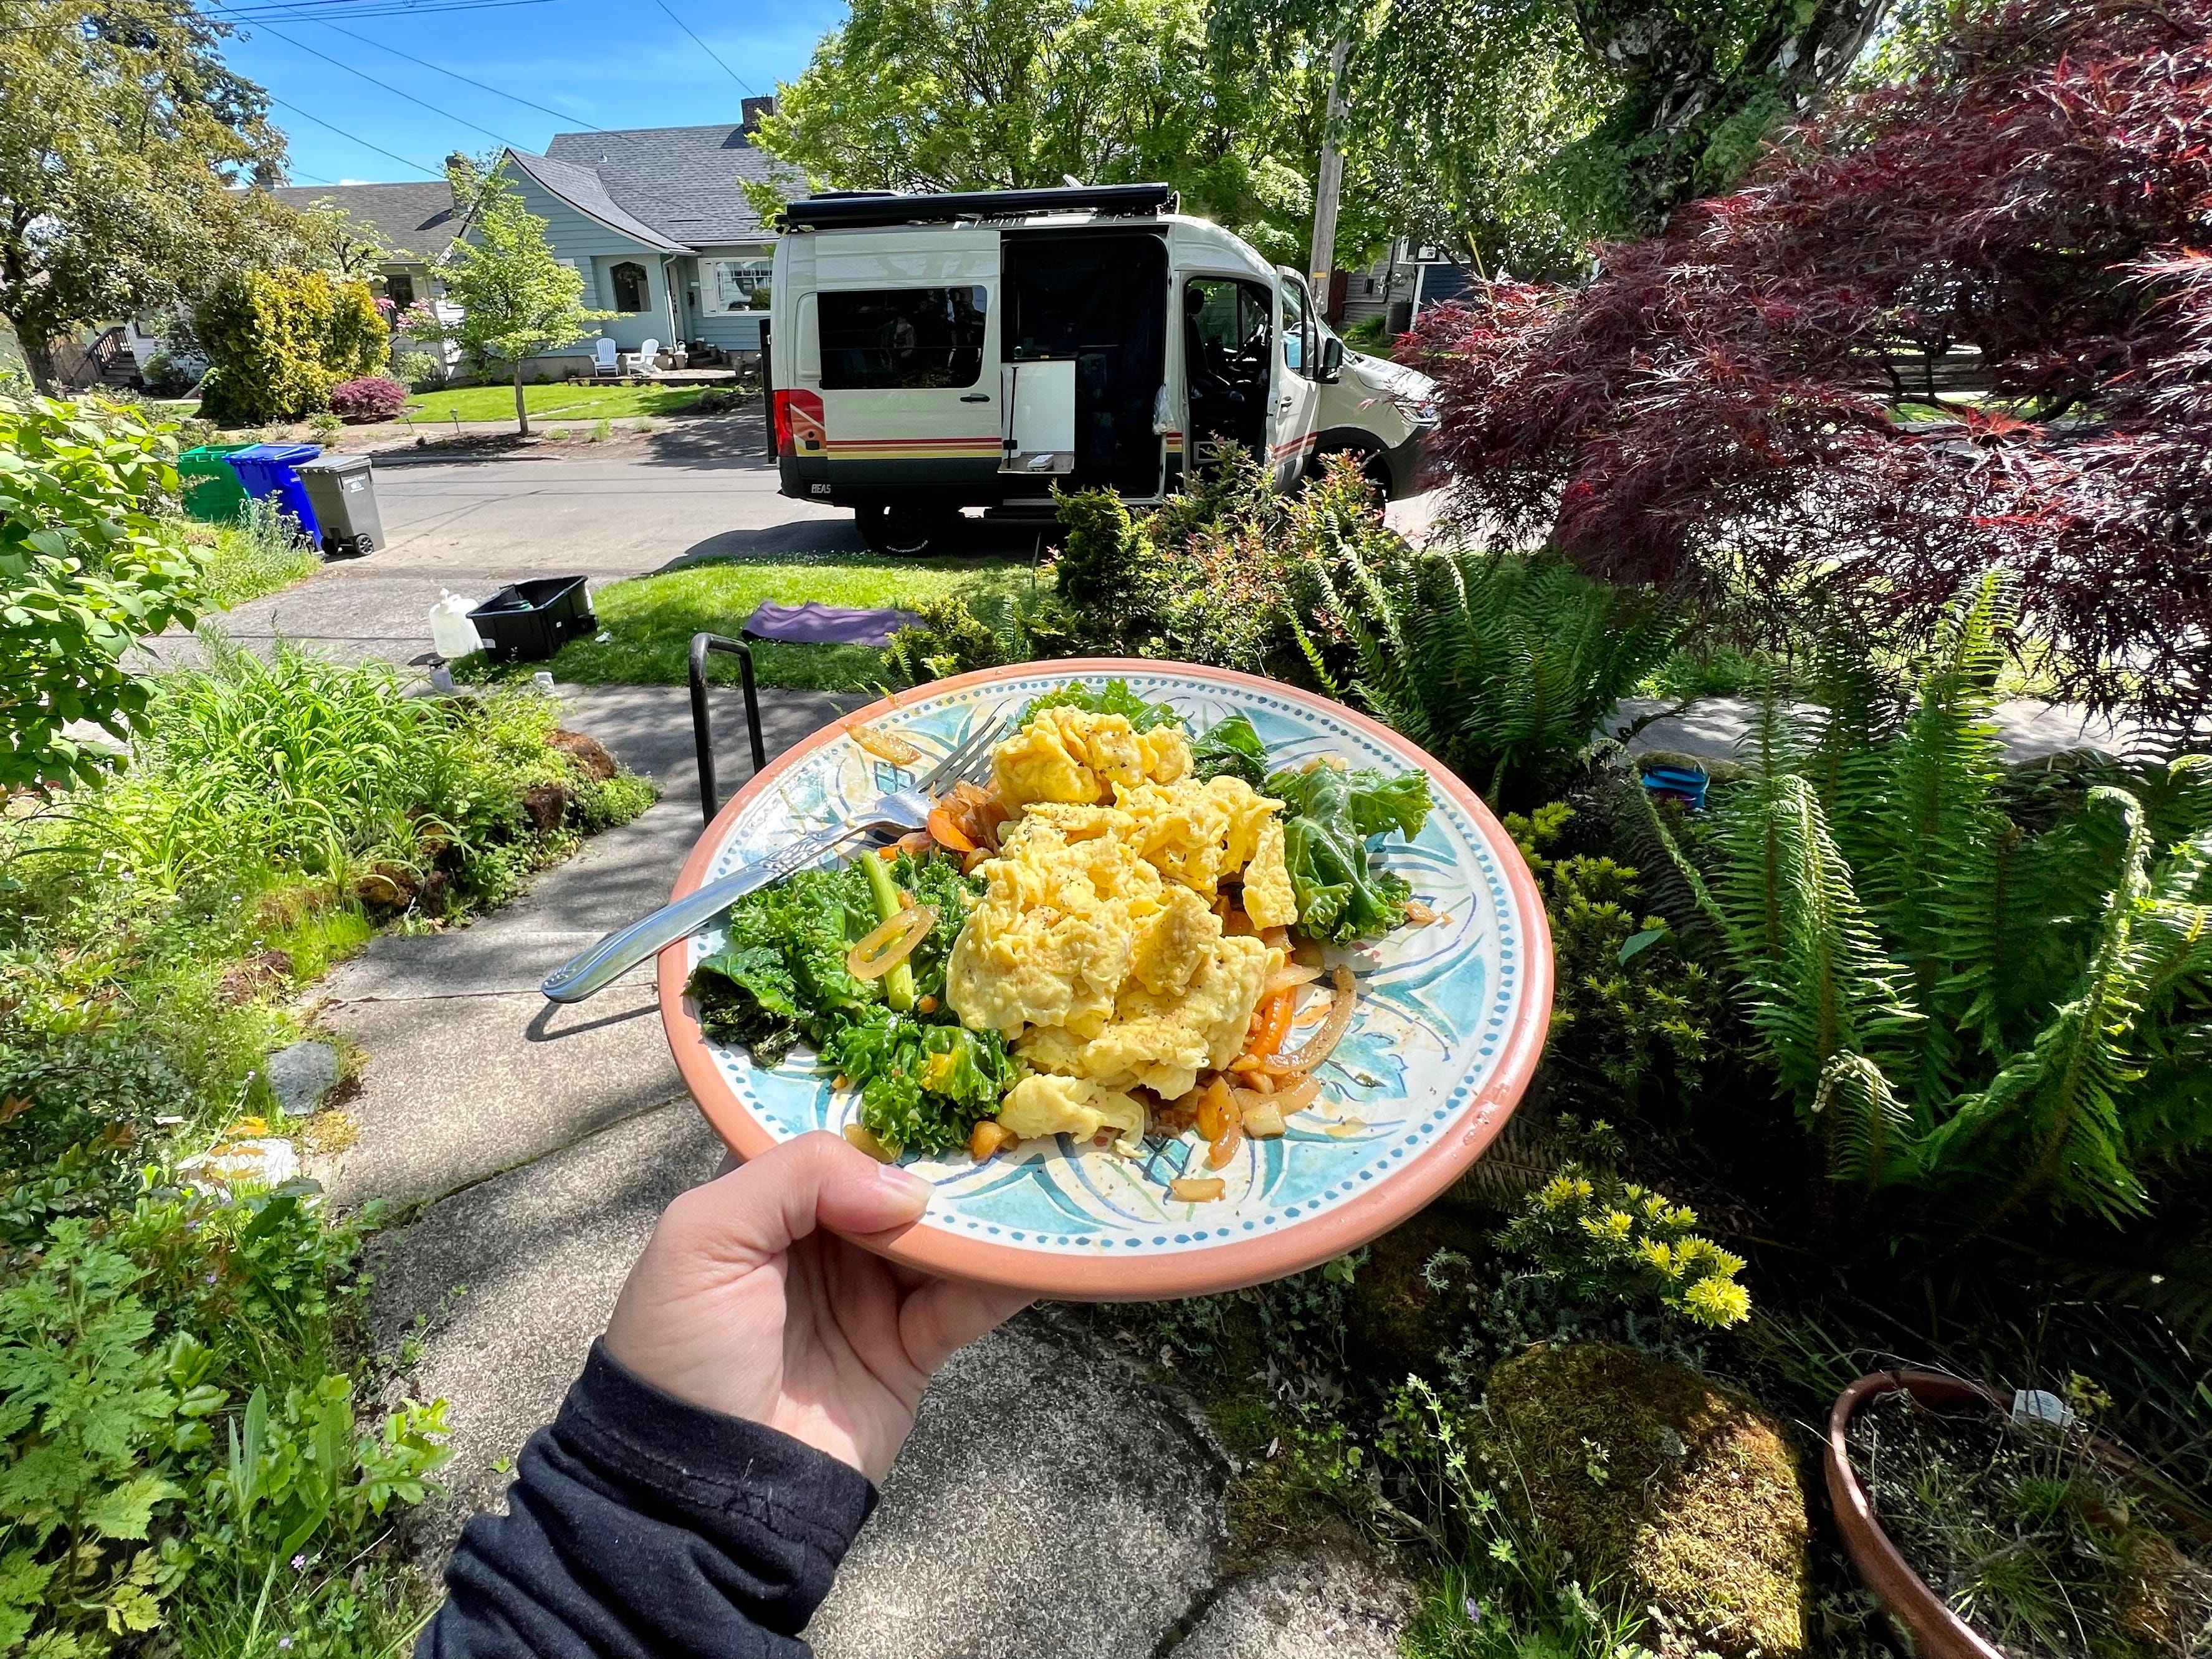 <p>Bringing groceries and cooking in the van helped us <a href="https://www.insider.com/how-much-van-life-costs-in-a-week-2022-3">save money on food</a>. The meals I enjoyed most were all homemade, and we prepared them using a portable battery and a hot plate.</p><p>We also went out to eat at various restaurants along our route. One of my favorite dishes was a crab mac and cheese that I indulged in while admiring the harbor in Newport, Oregon.</p>